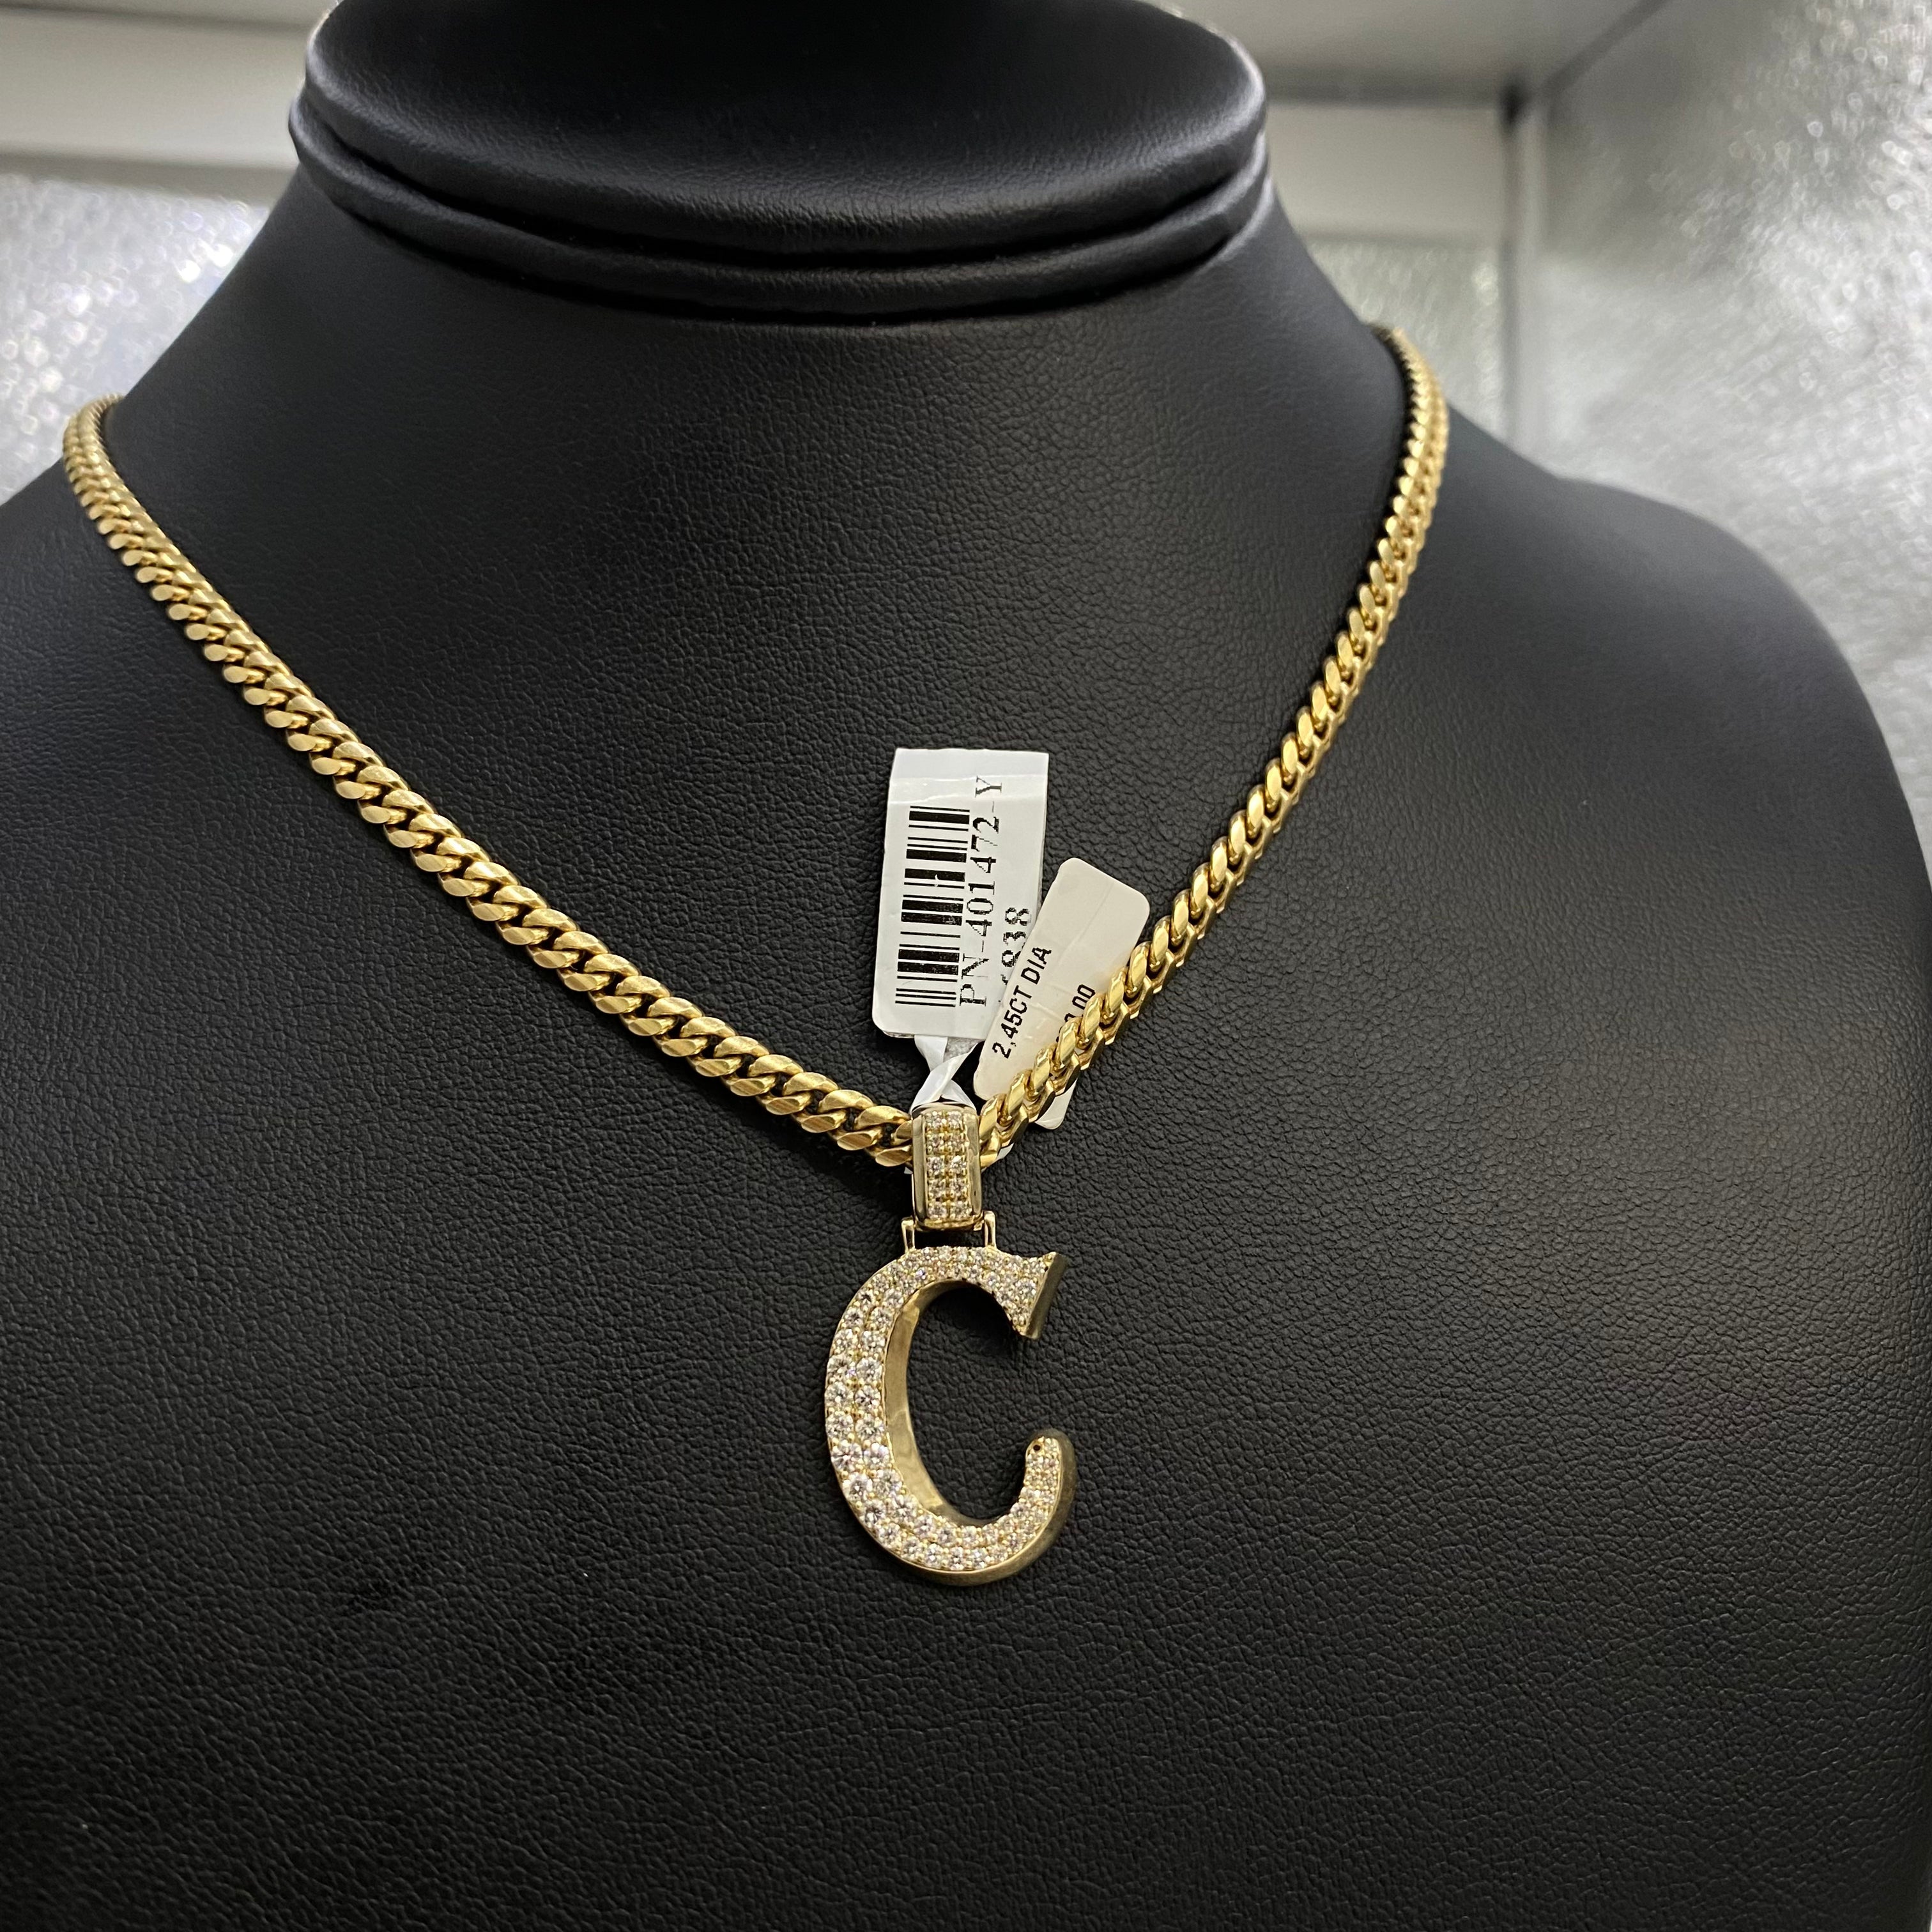 Letter C Pendant 14K Yellow Gold With Diamond / 3.2gr